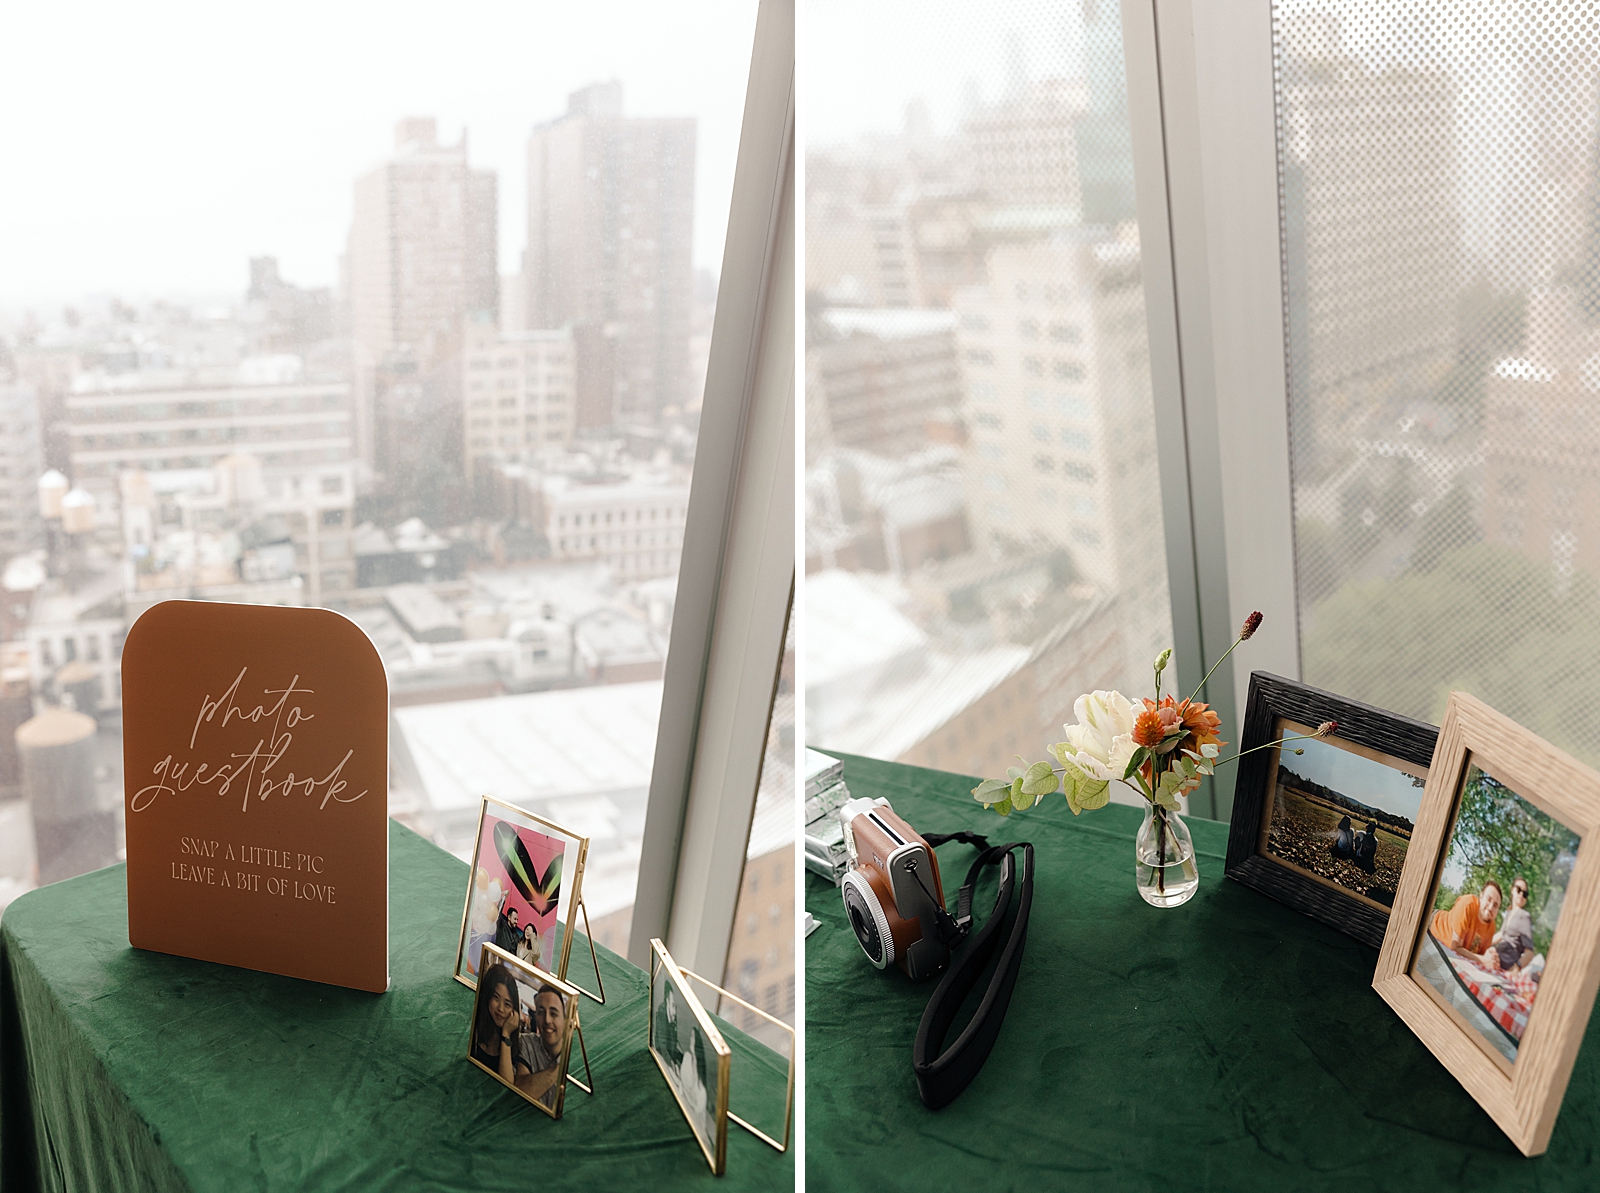 Left photo: Shot of a table displaying a photo guestbook sign and framed photos of the couple.
Right photo: Shot of a table displaying cameras and framed photos of the couple. 